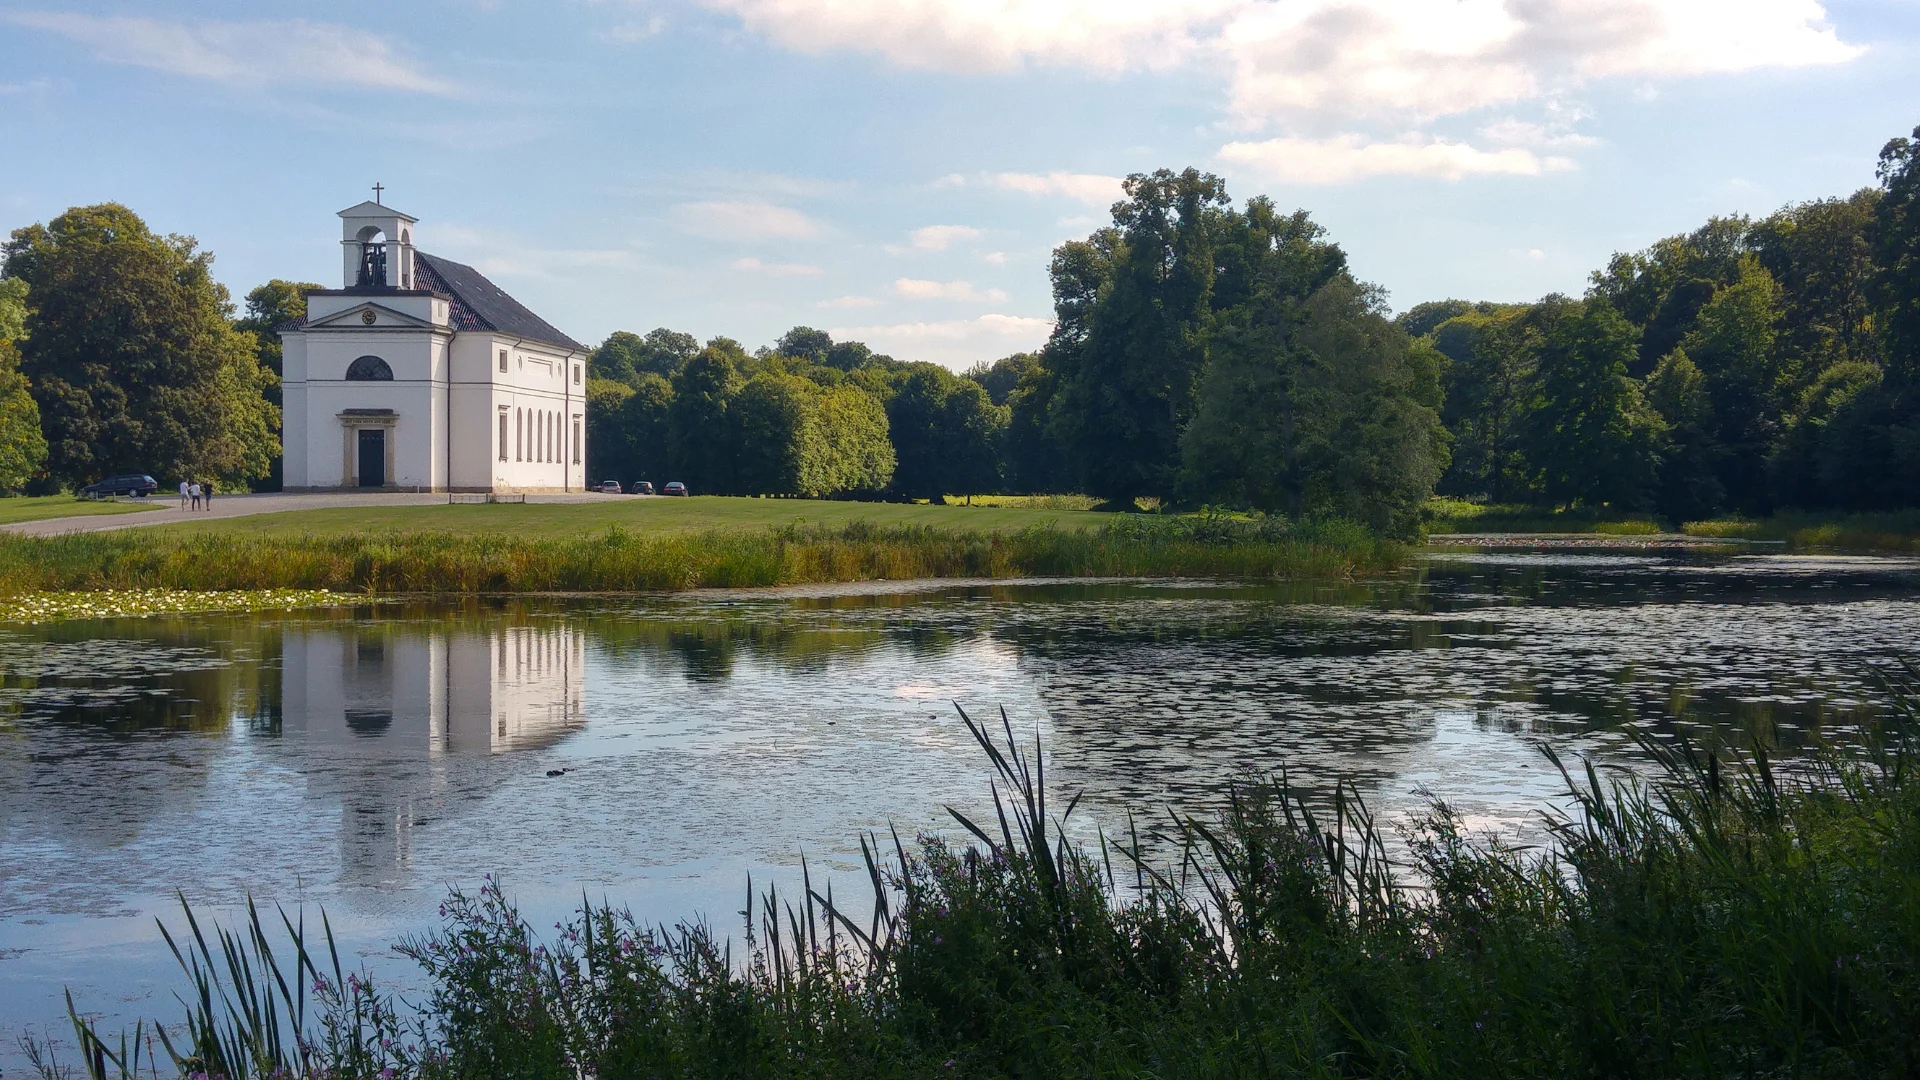 Innargi and Norfors agree to study the potential for geothermal energy in Hørsholm, Denmark